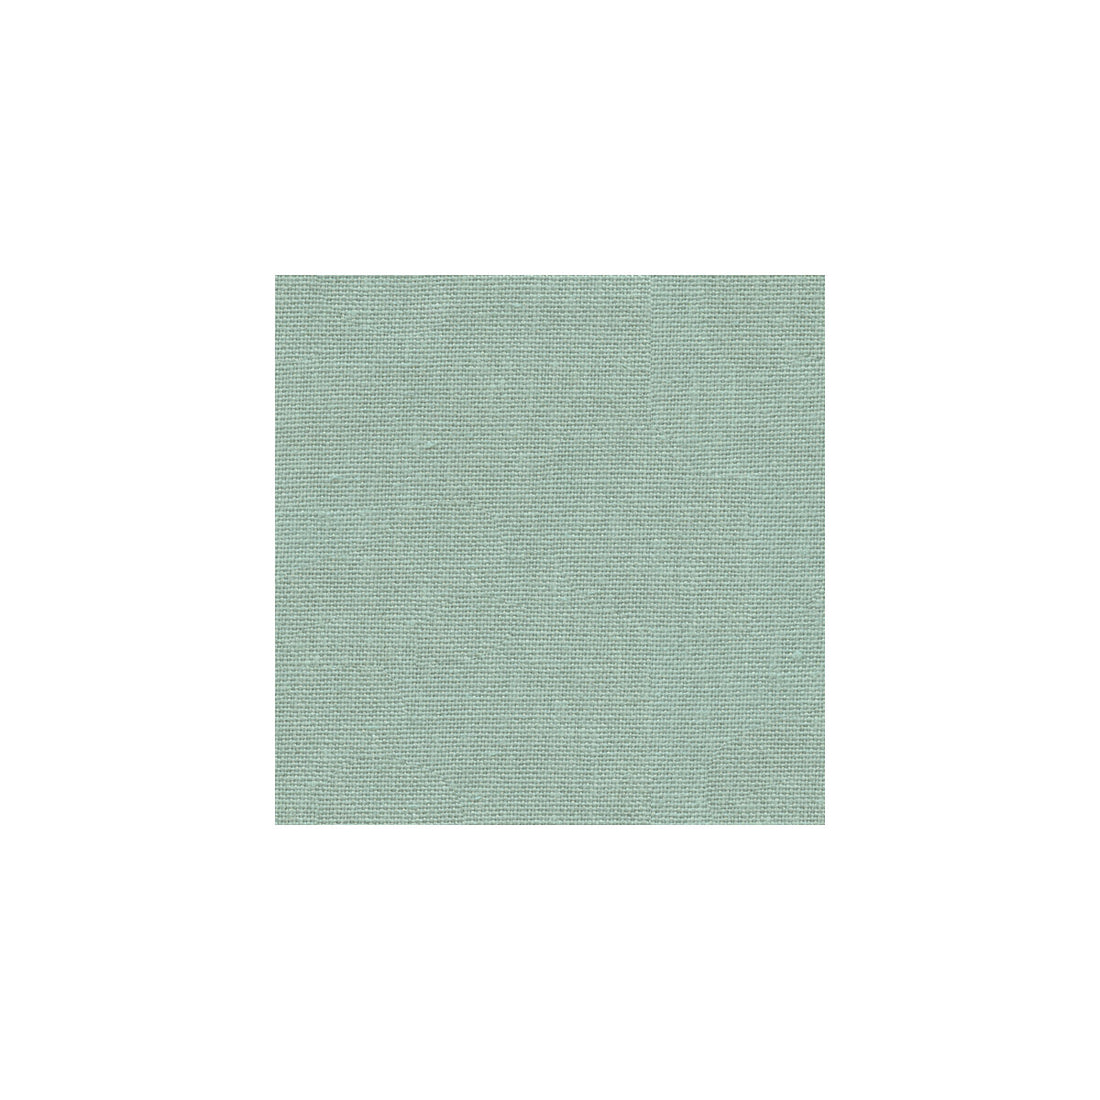 Cheshire Linen fabric in glacier color - pattern 2015148.15.0 - by Lee Jofa in the Colour Library VII collection